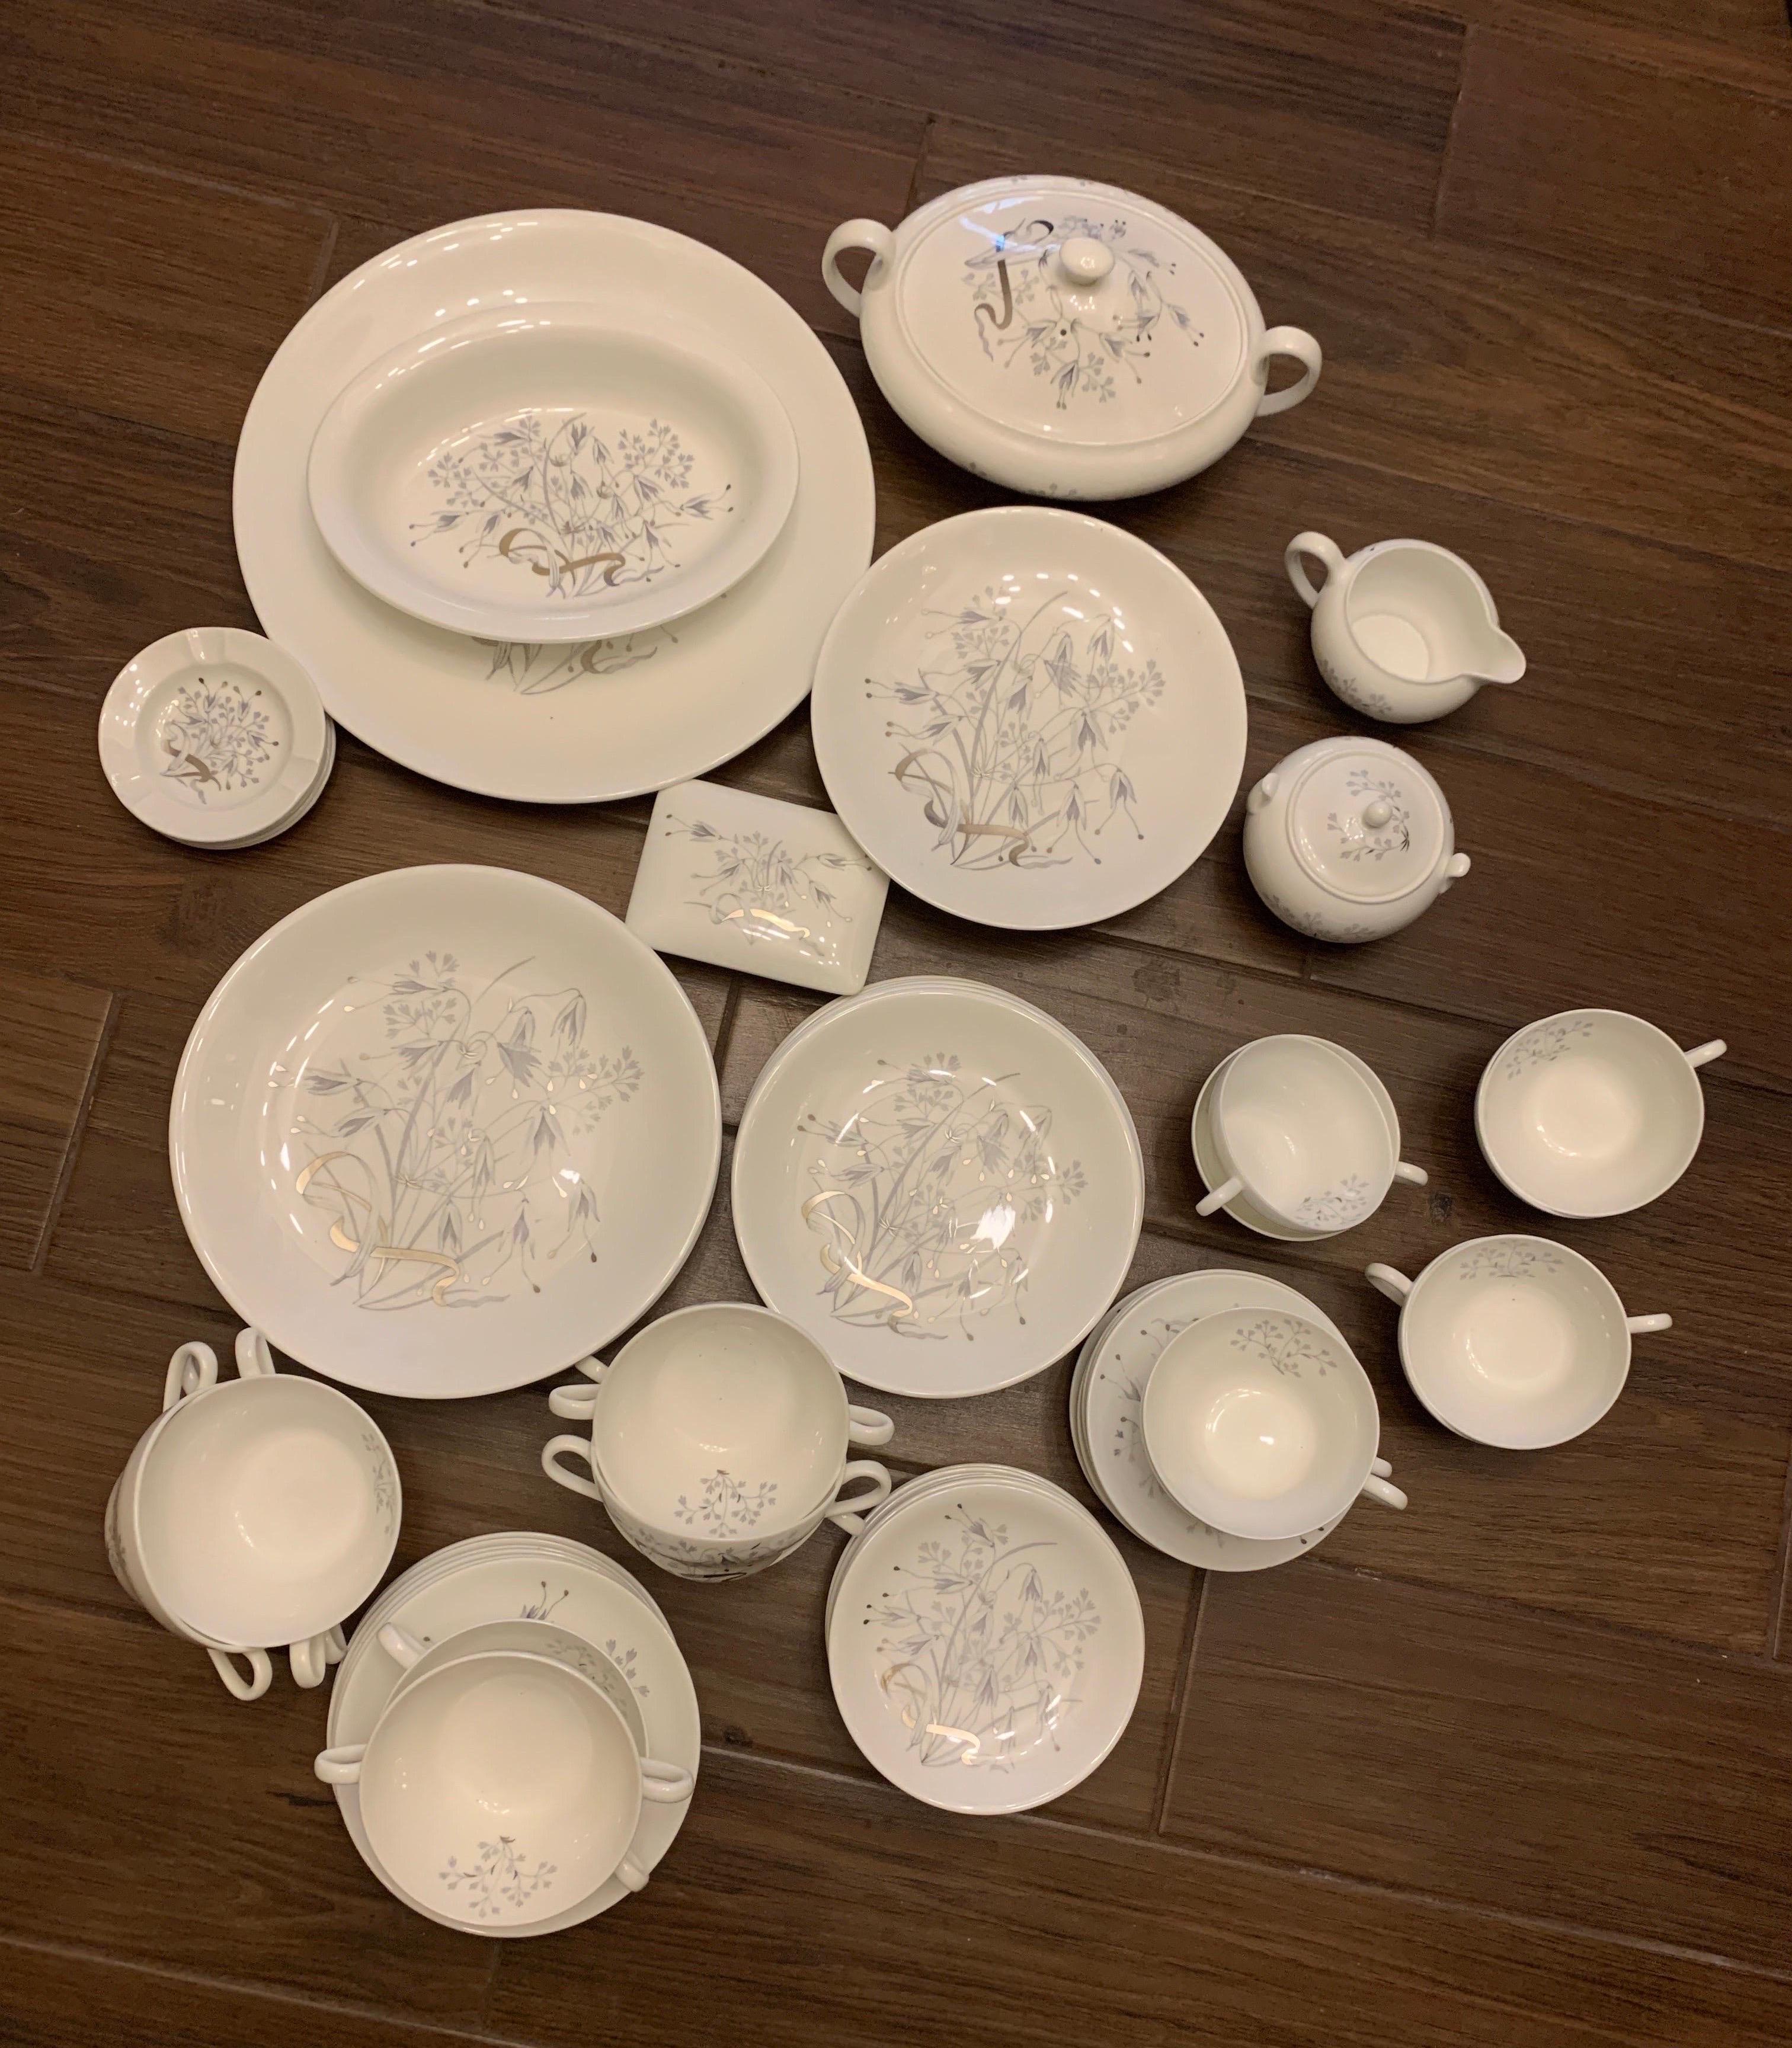 Just in time for the Holidays! Have a jaw dropping table top with this British 1960s set. This vintage beautiful bone china set made by Wedgewood in England came from a multi million dollar Palm Springs Estate. The pattern is grey English flowers